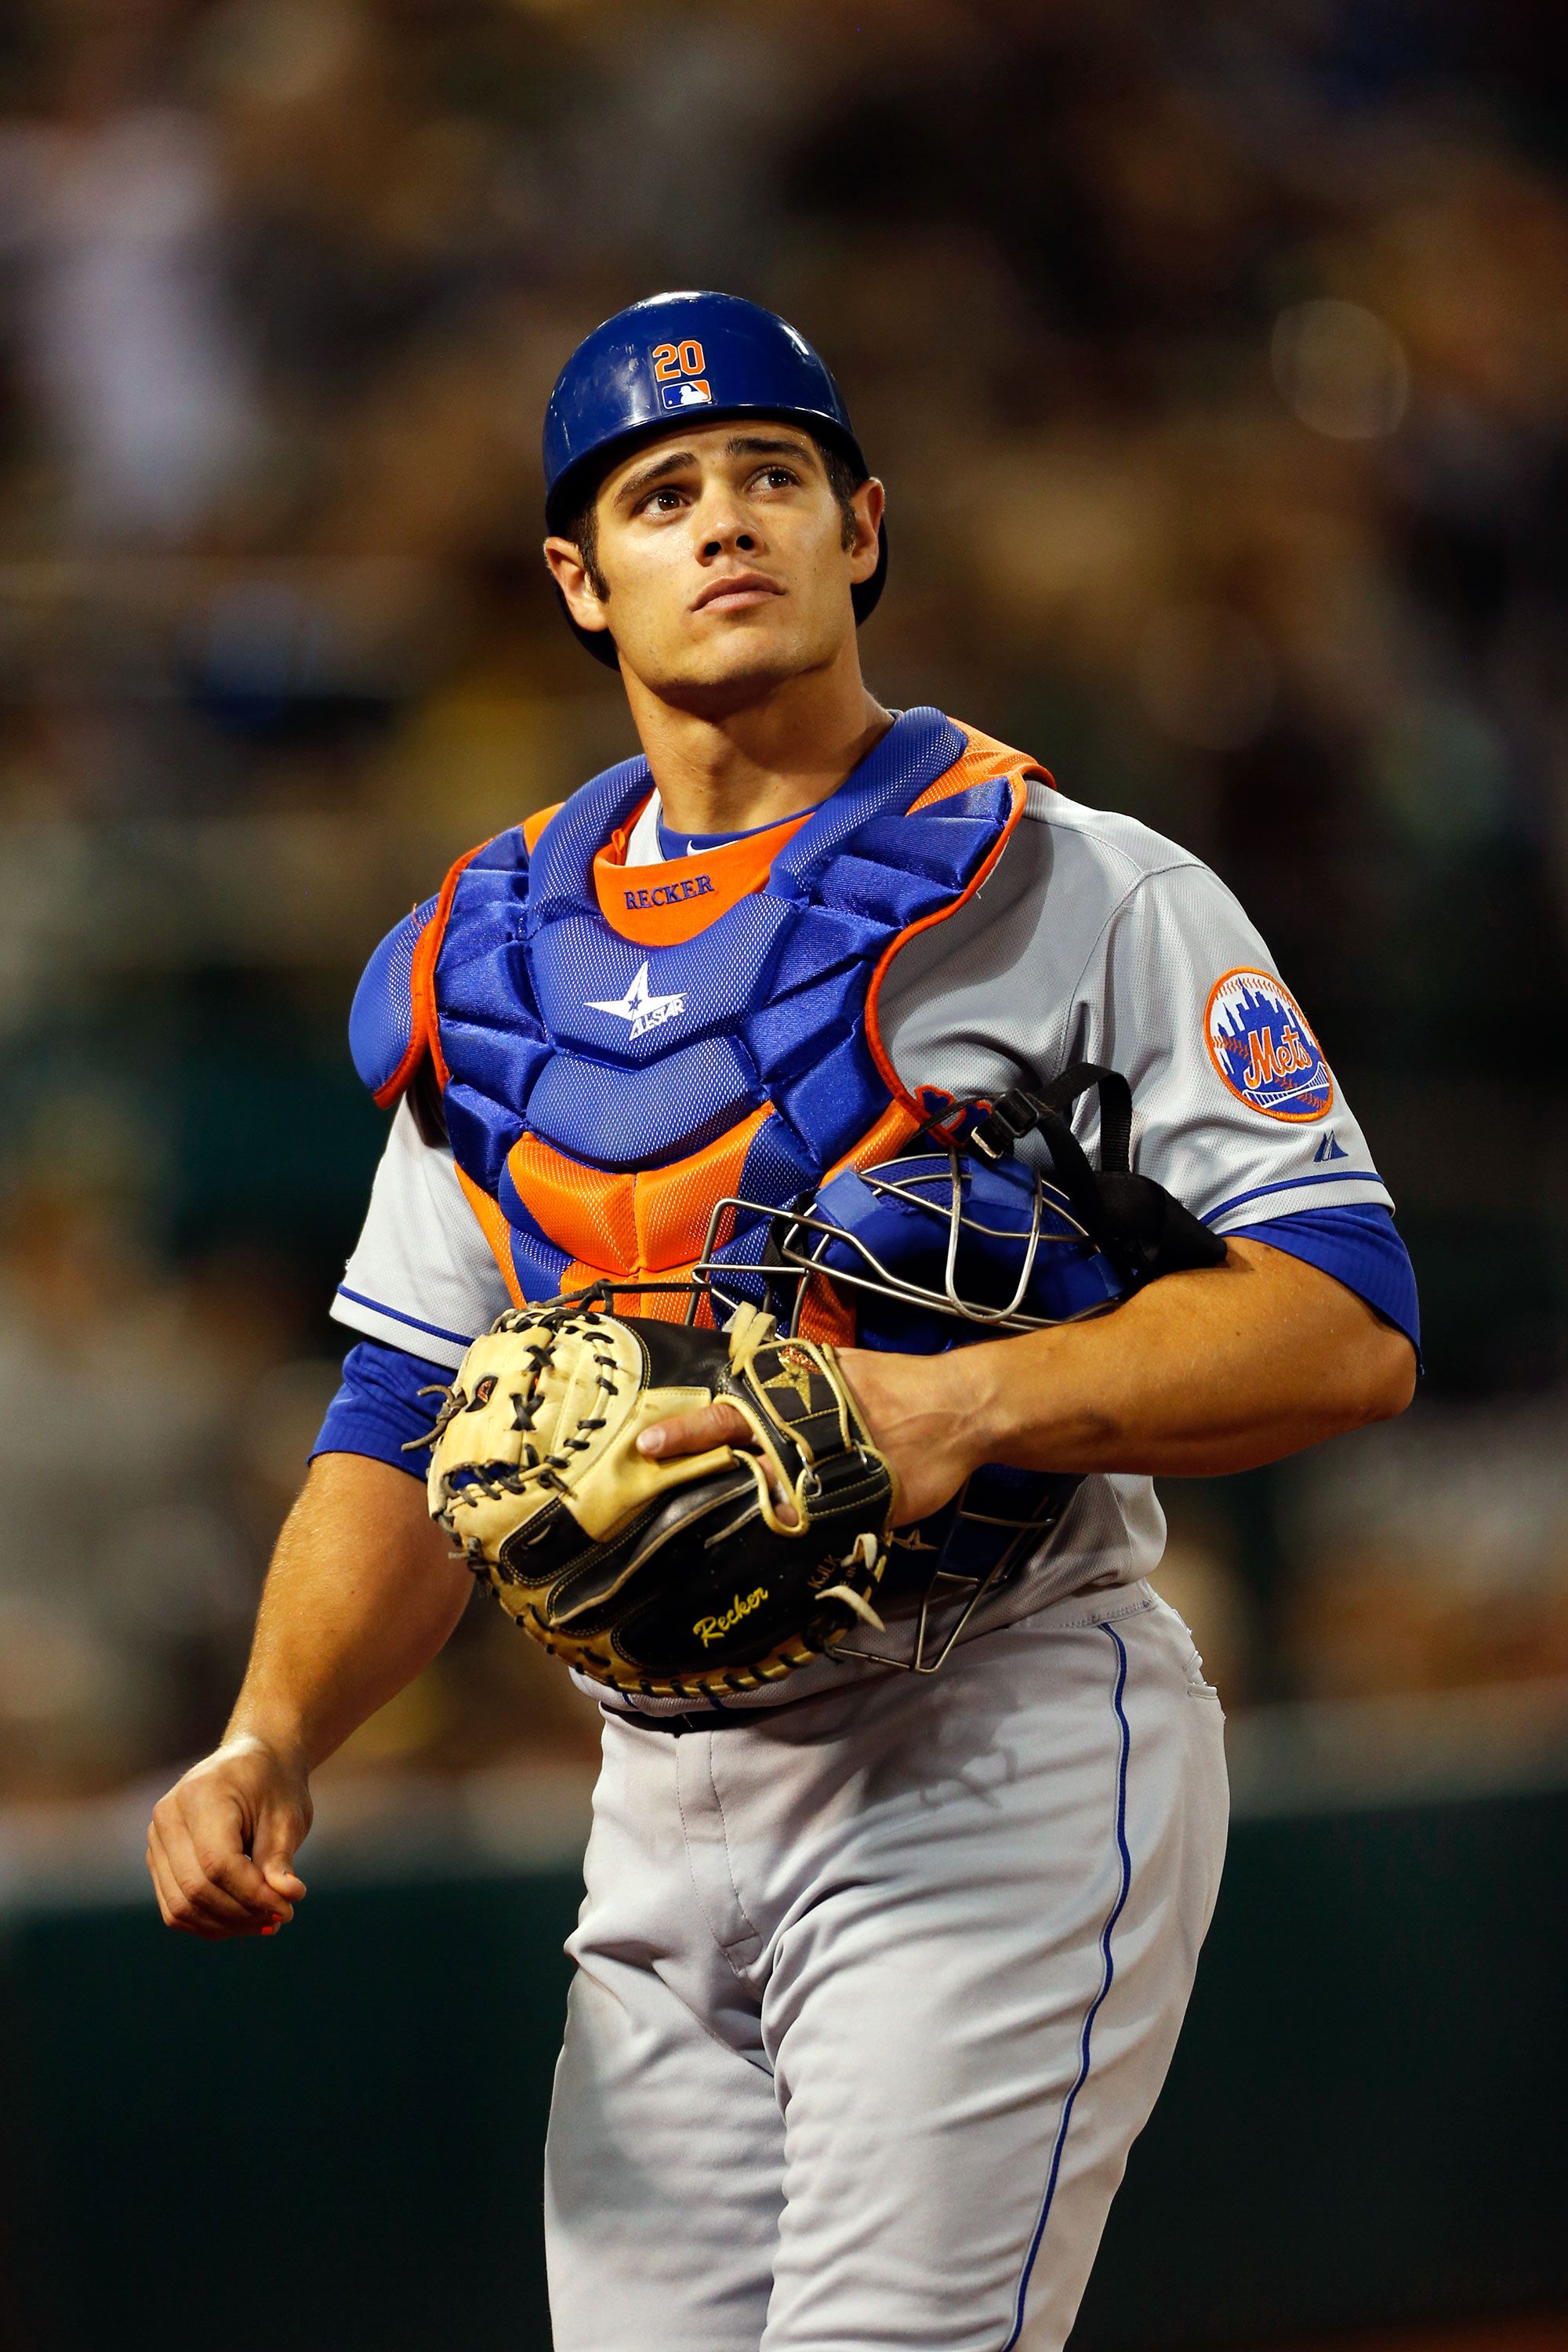 Best-looking MLB Players - Hottest Baseball Players